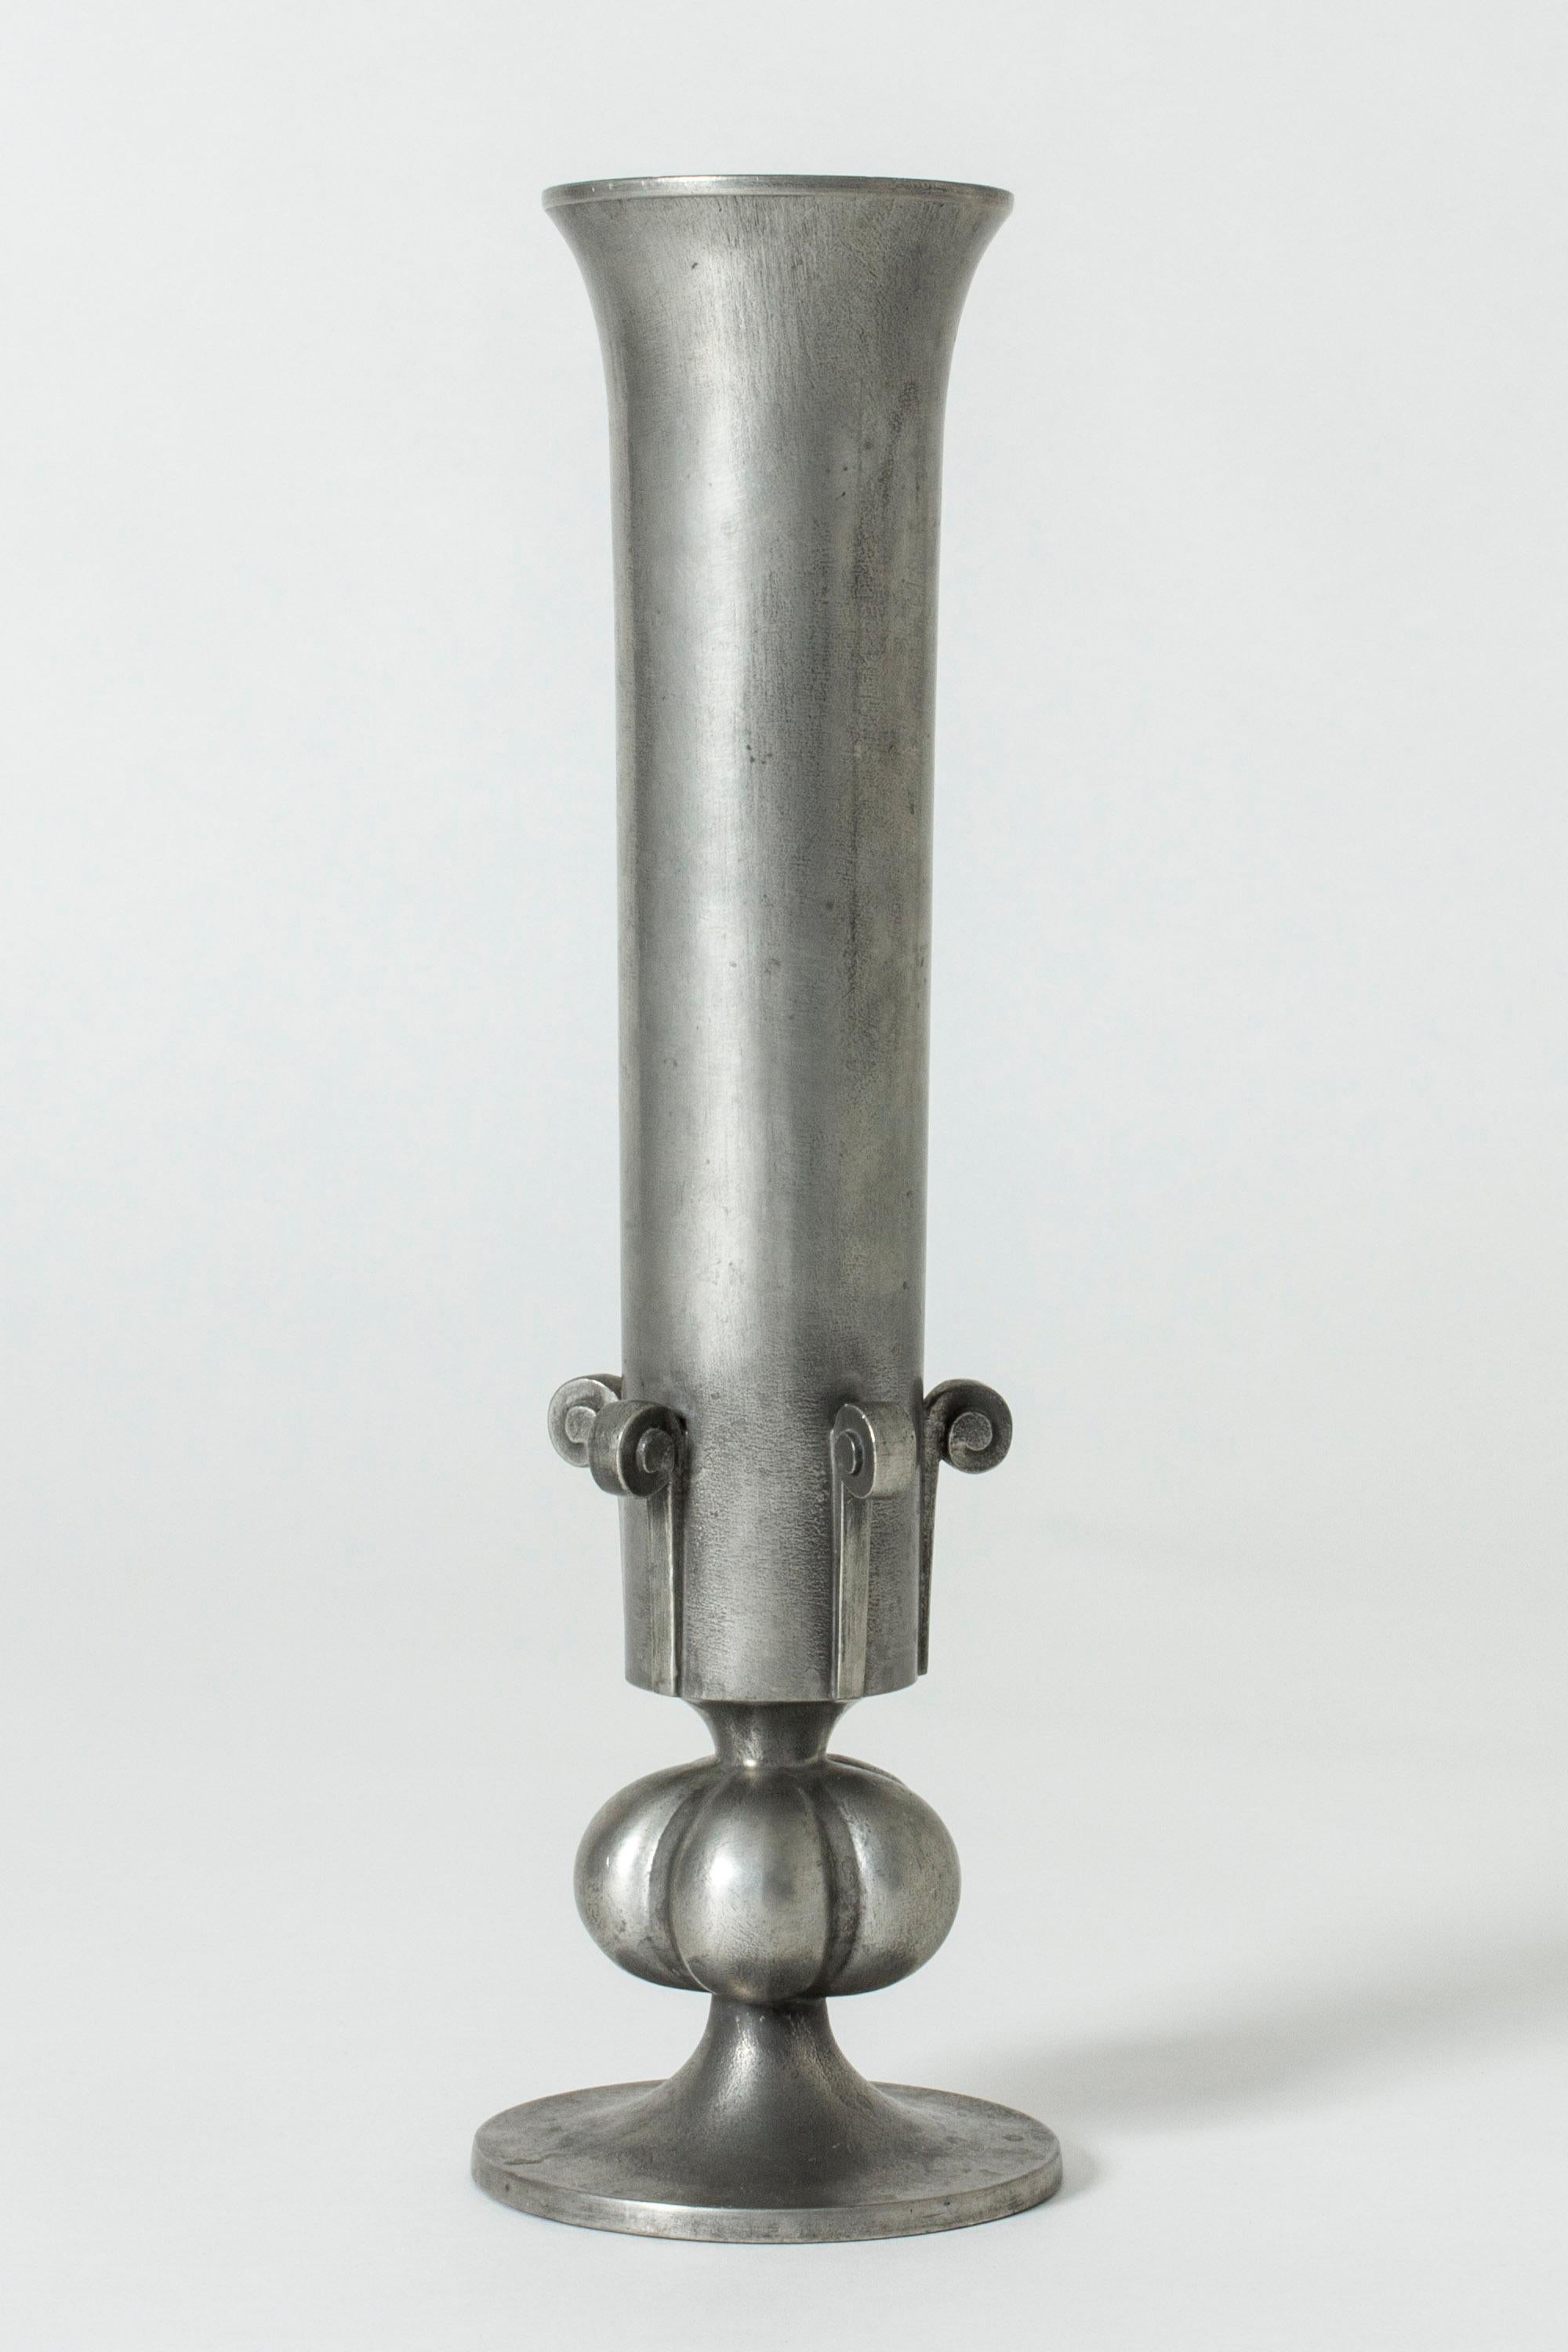 Tall pewter vase by Edvin Ollers, in a striking, statuesque design. Clean lines and beautiful decorative details.